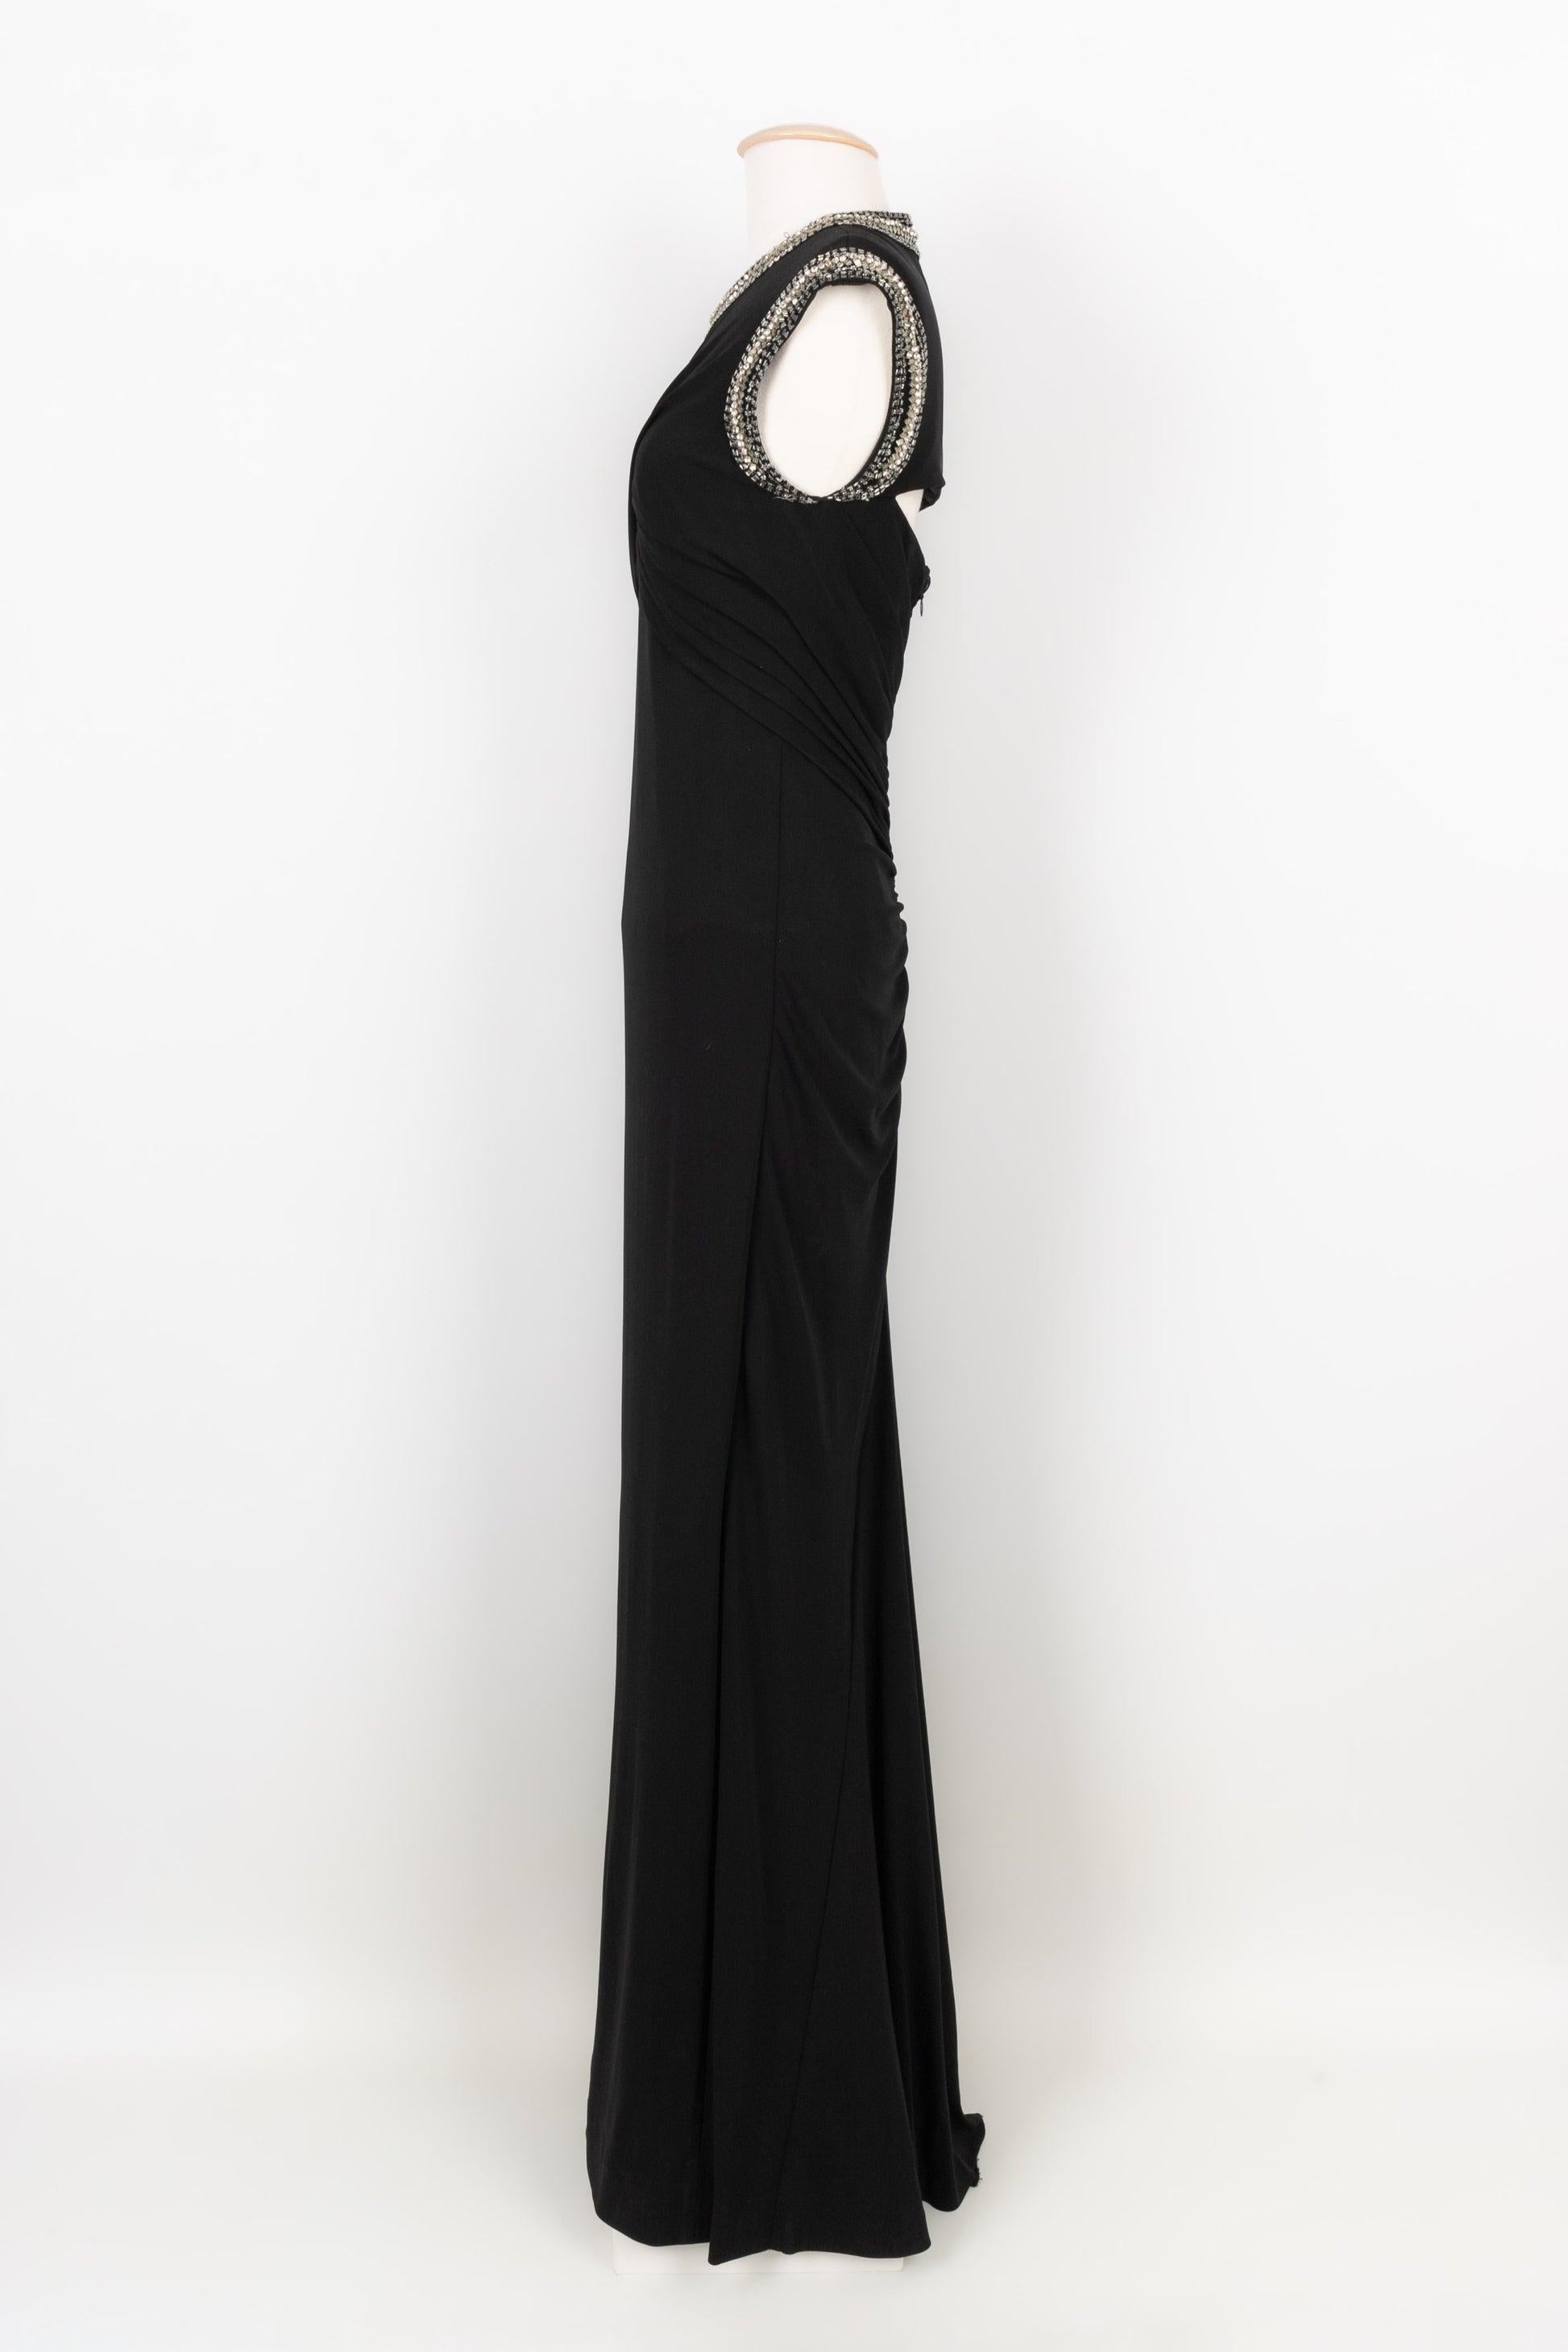 Alexander McQueen - (Made in Italy) Black jersey long dress embroidered with costume pearls and rhinestones. Indicated size 42IT.

Additional information:
Condition: Very good condition
Dimensions: Chest: 45 cm - Waist: 36 cm - Length: about 160